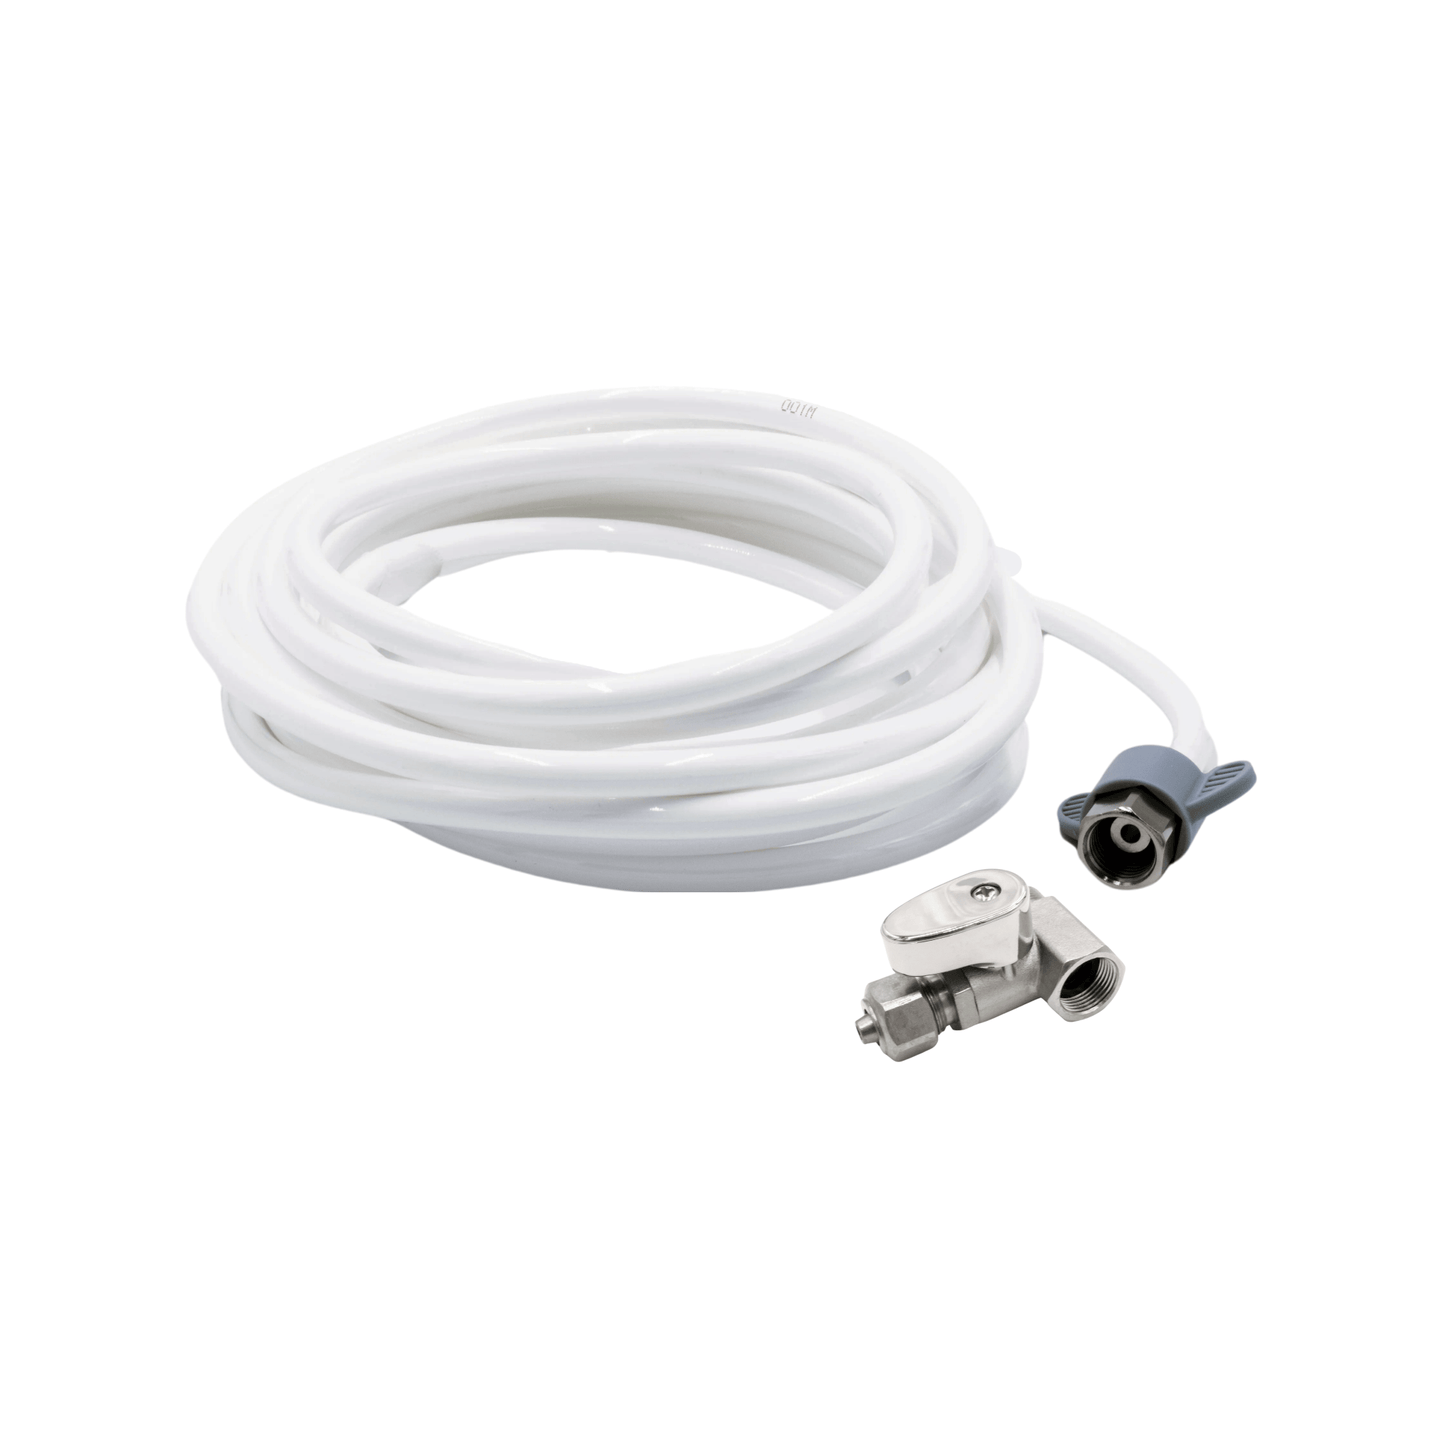 NEO Plus Kit: Alternative Installation for 3/8" Supply Valves - 16ft Plastic Hot Water Hose with 3/8" Metal T-Adapter